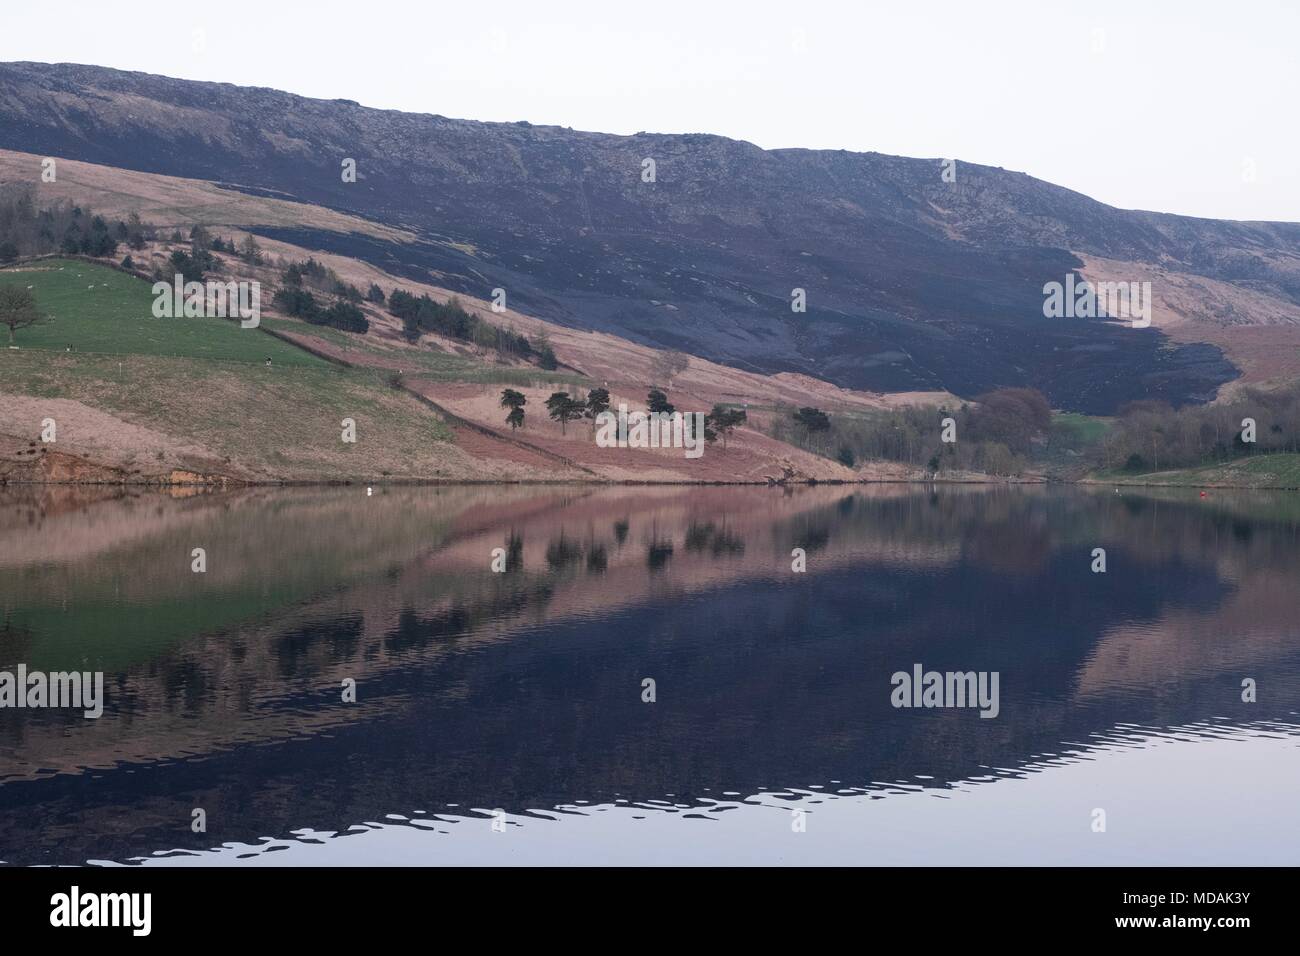 Oldham, UK. 19th April 2018. Emergency services remain at the scene of a moorland fire at Dovestone Reservoir near Oldham on Thursday, April 19, 2018 of which the majority has now been extinguished. Firefighters battled to contain the fire that started at around 2:30pm. Credit: Christopher Middleton/Alamy Live News Stock Photo